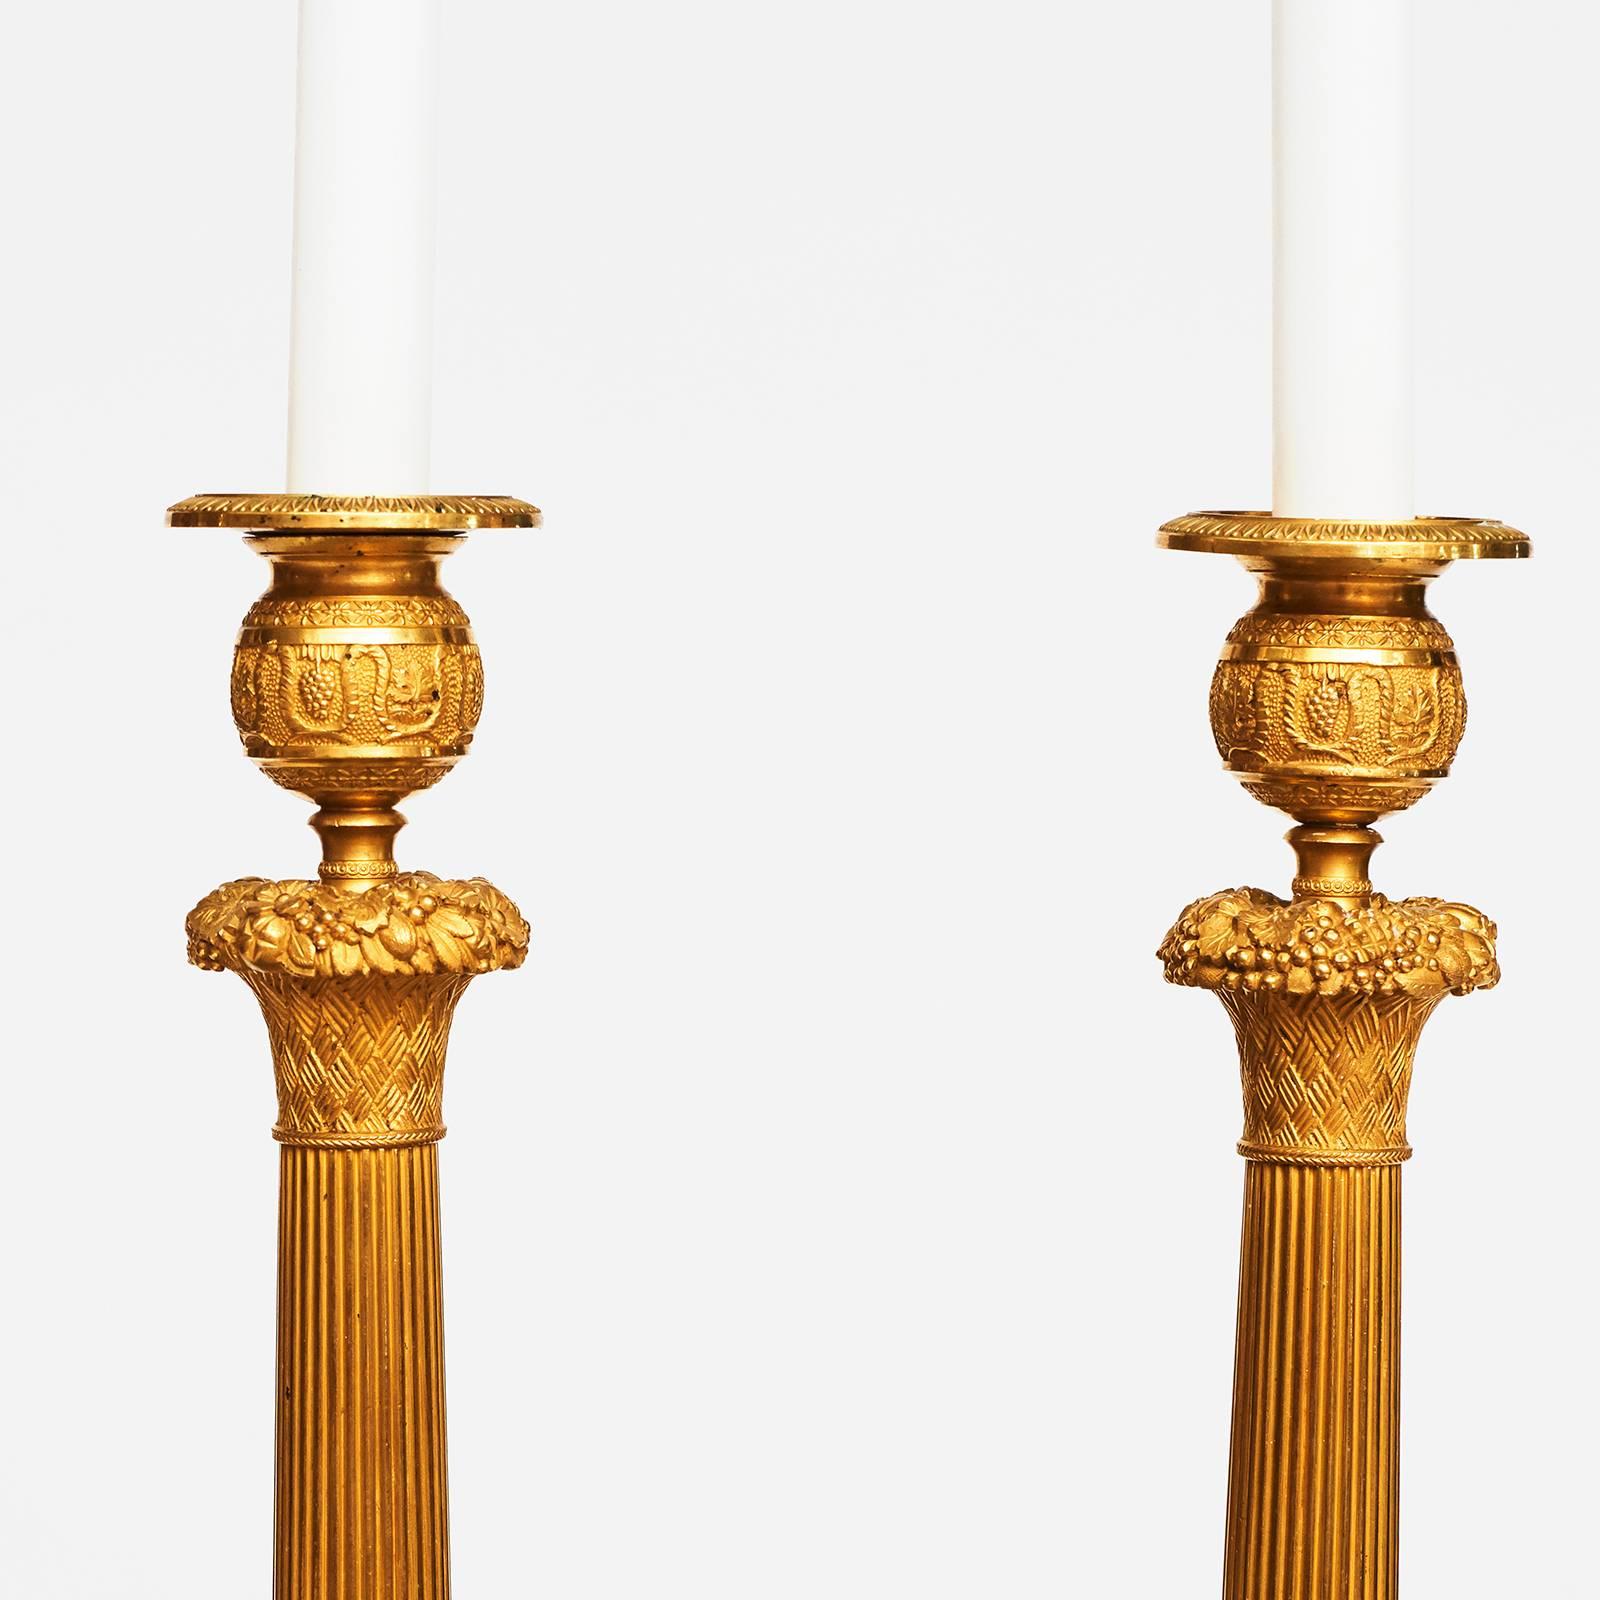 A good pair of French Charles X ormolu candlesticks, circa 1820s, with inset bobèches above a Campana vase, a cast fruit band and a spreading tapered stem, the round base with cast palmette and acanthus leaf decoration.

 